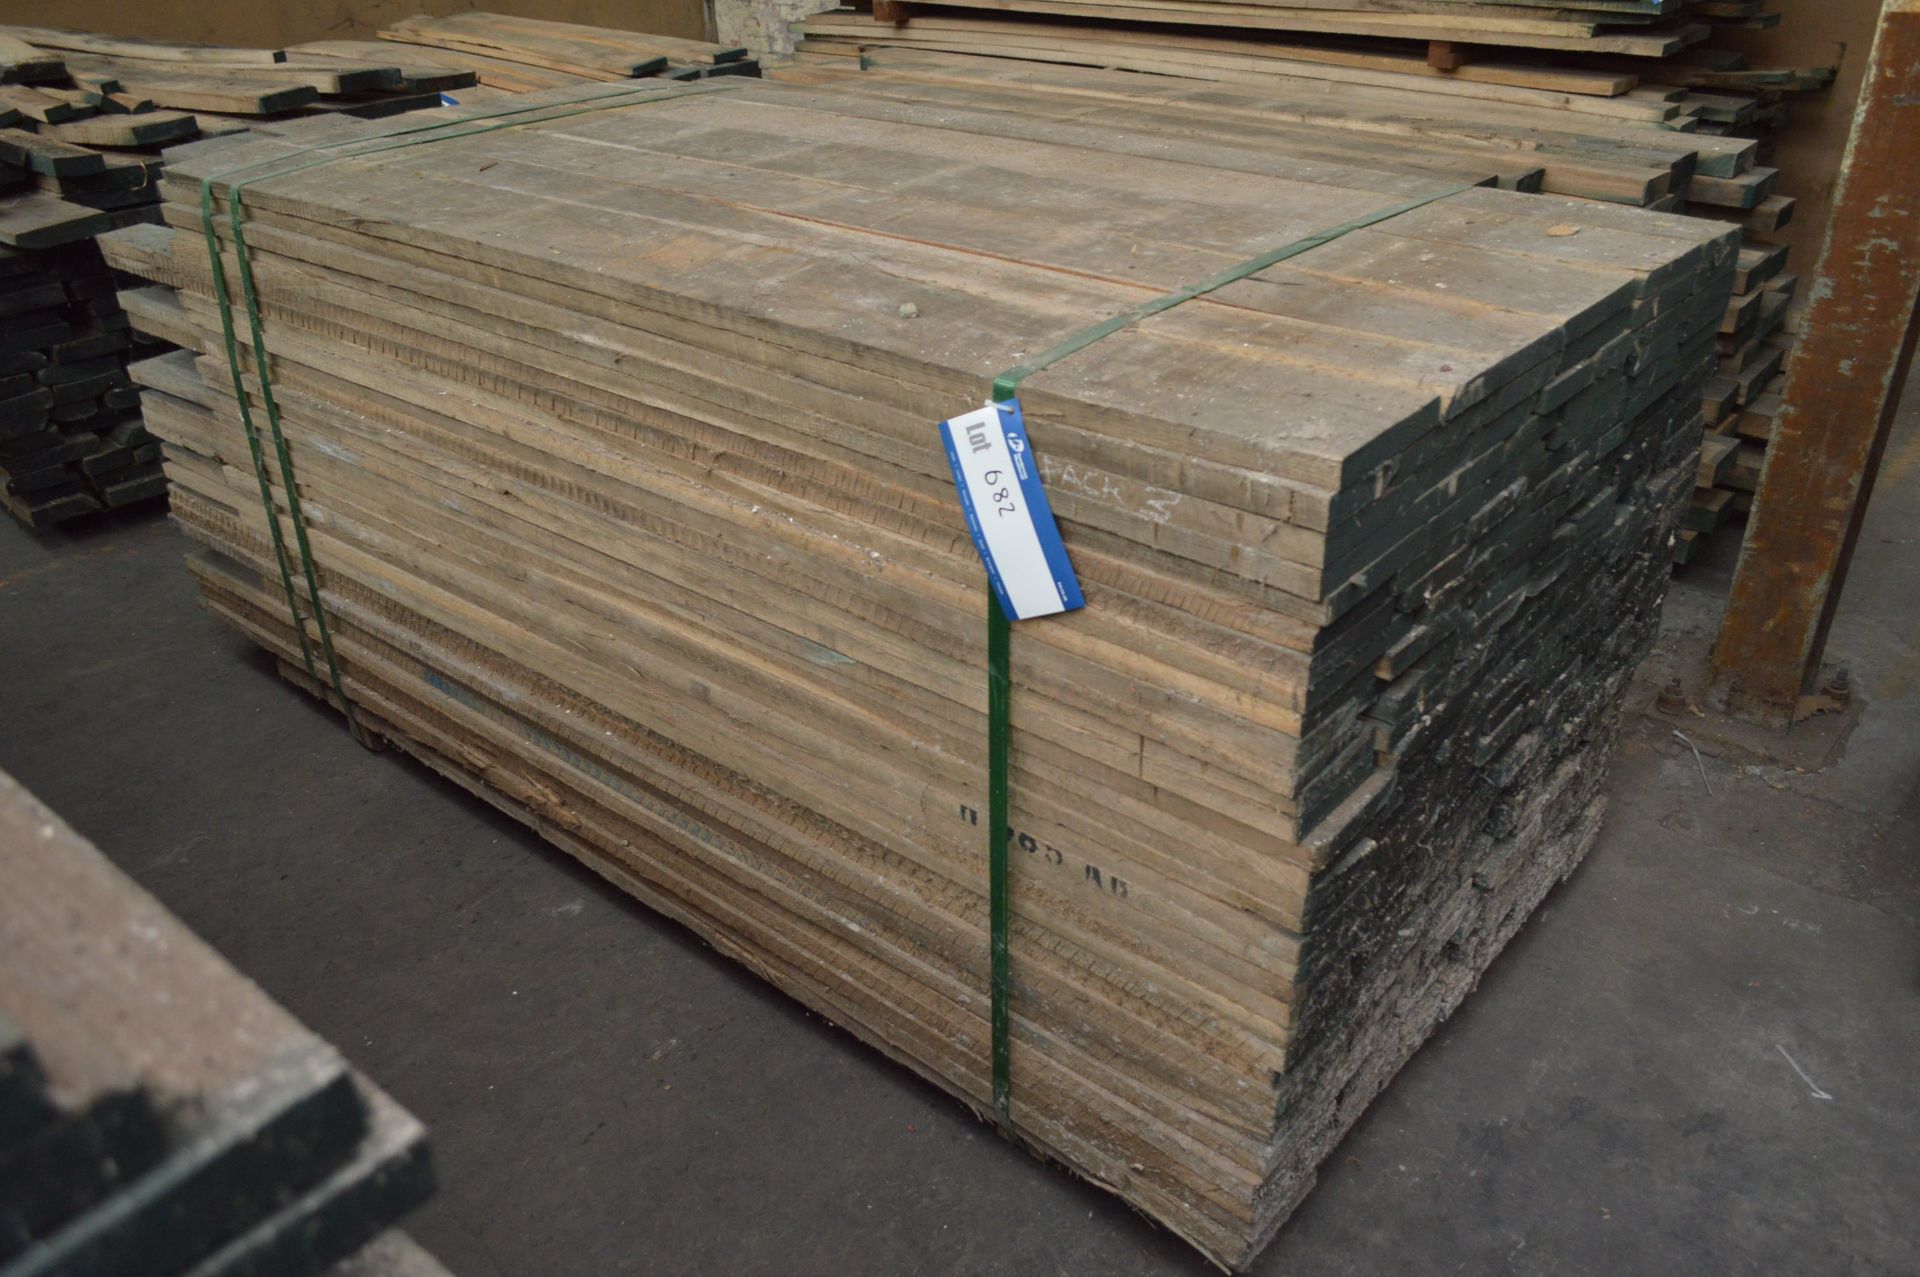 ROUGH SAWN ELM, (in one stack), each length approx. 7-8ft long